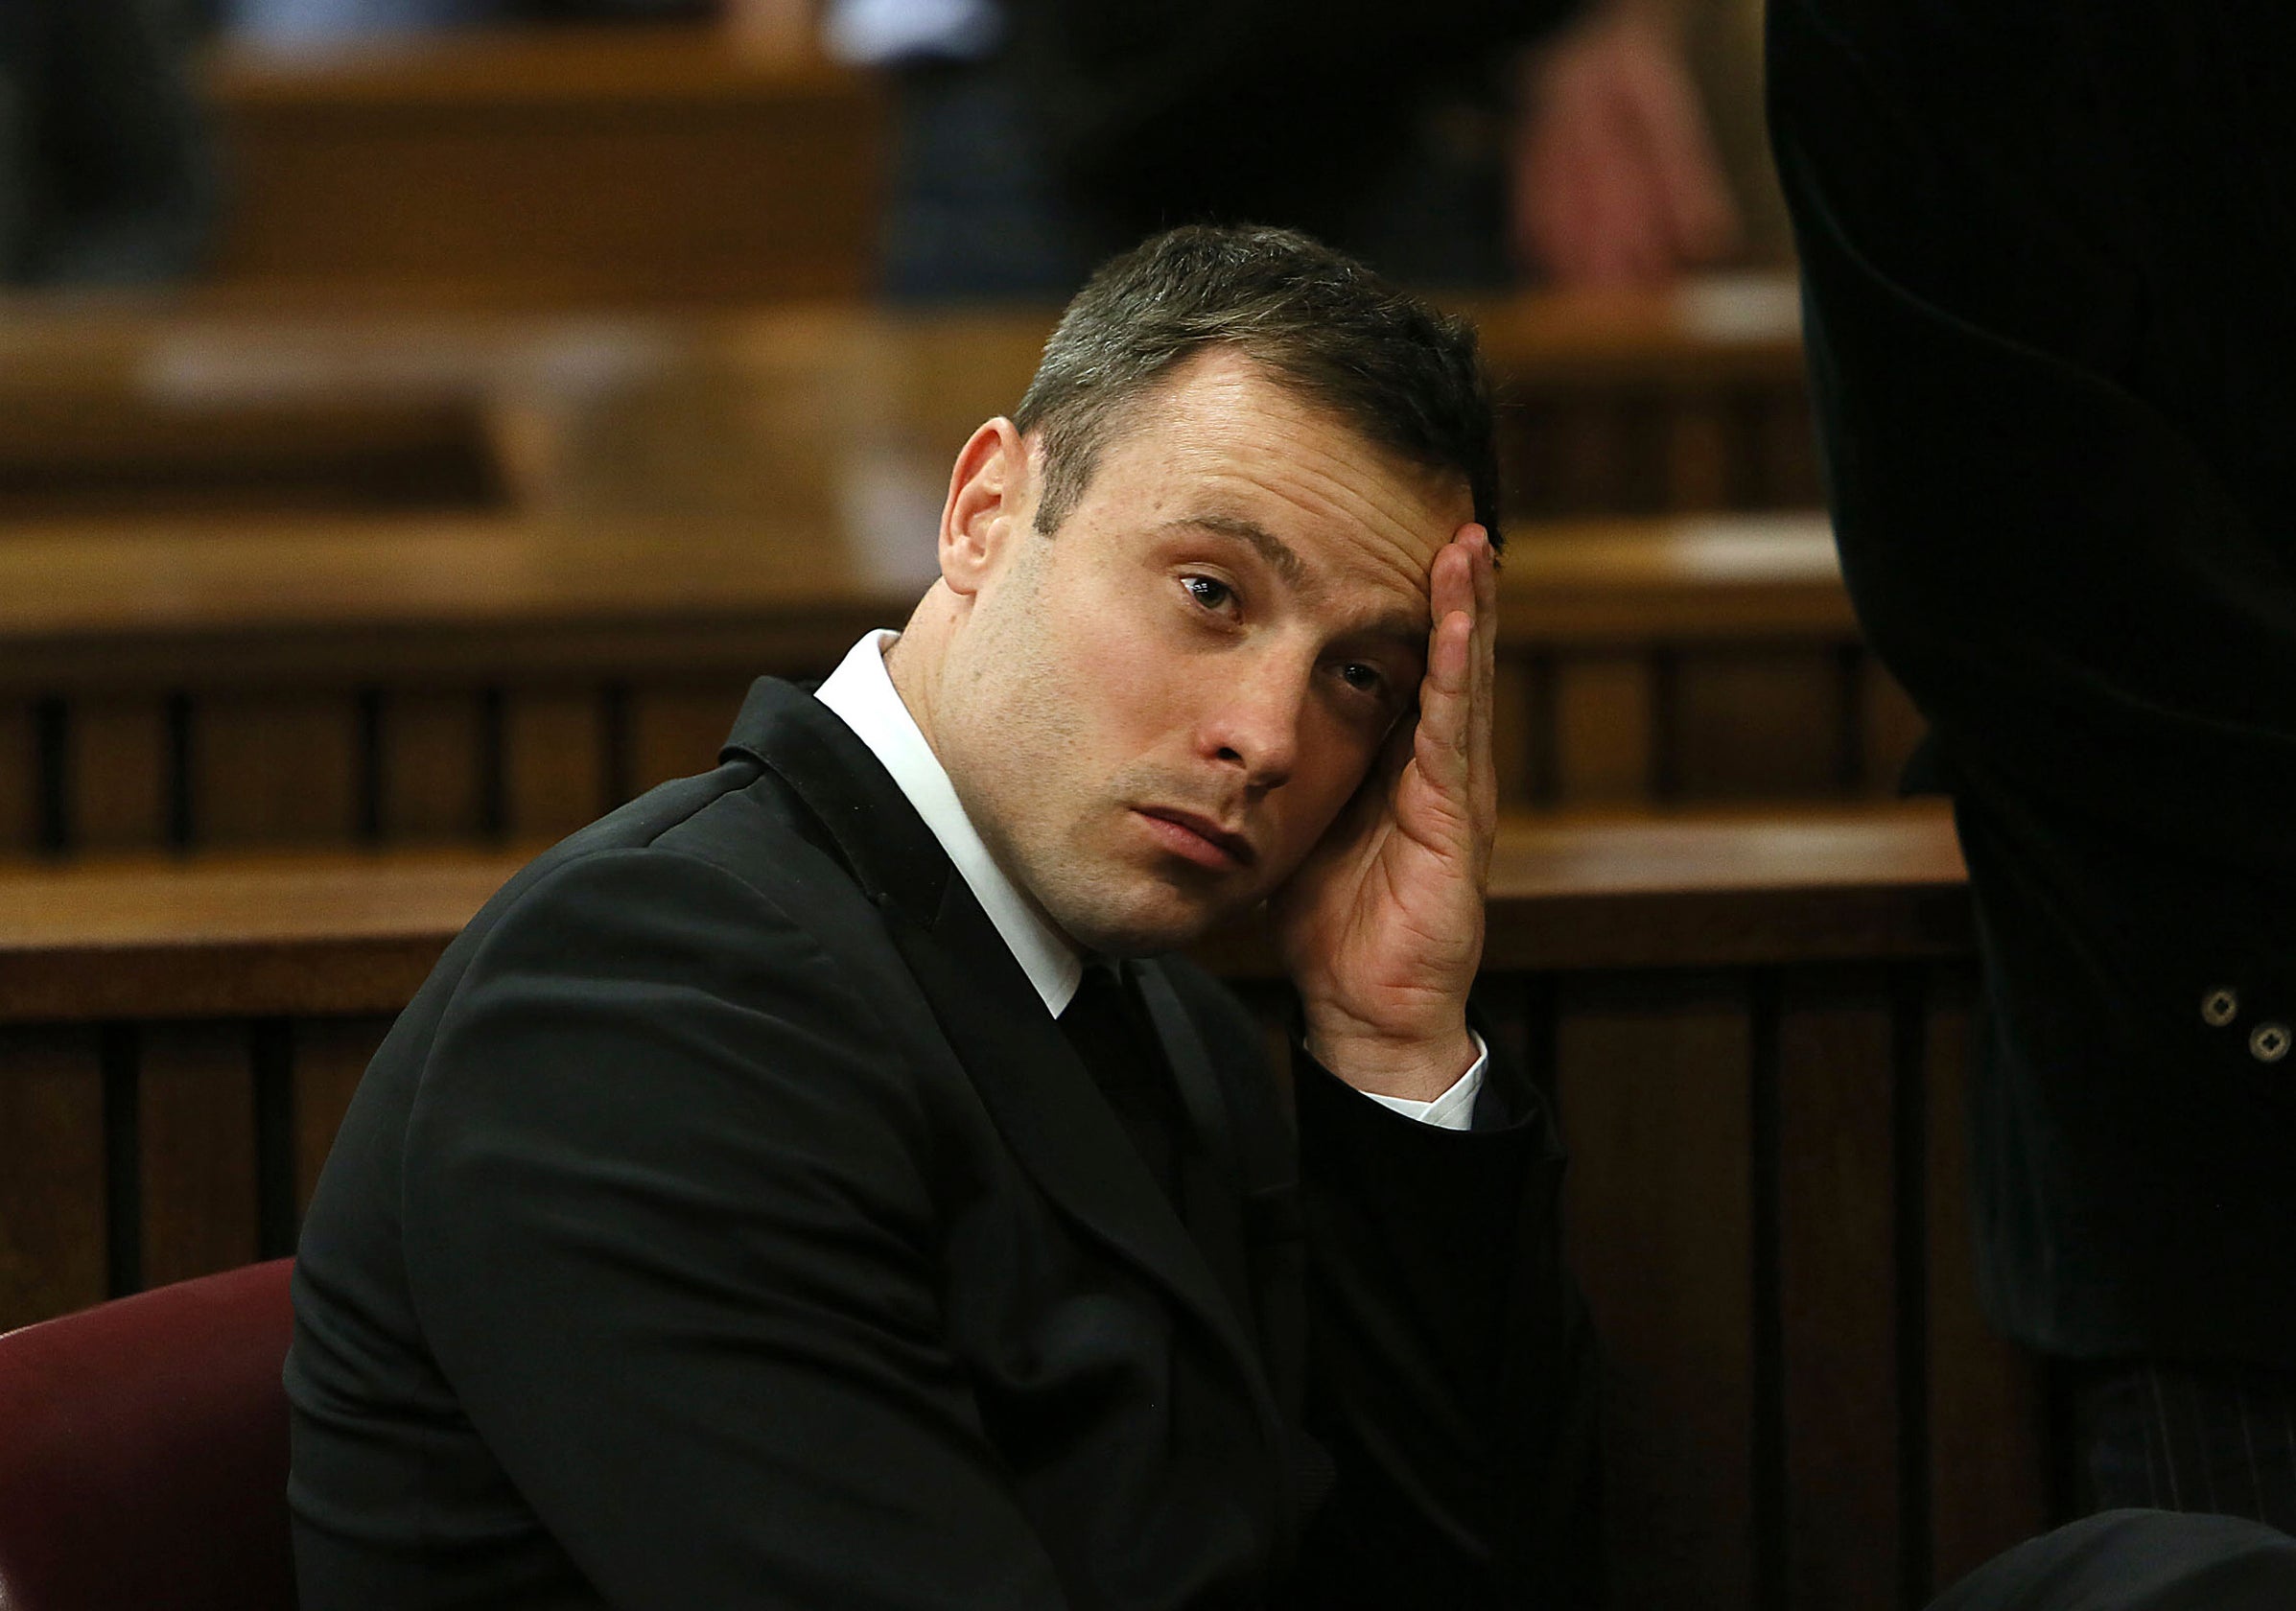 Pistorius gestures at the end of the fourth day of his trial for murdering his girlfriend